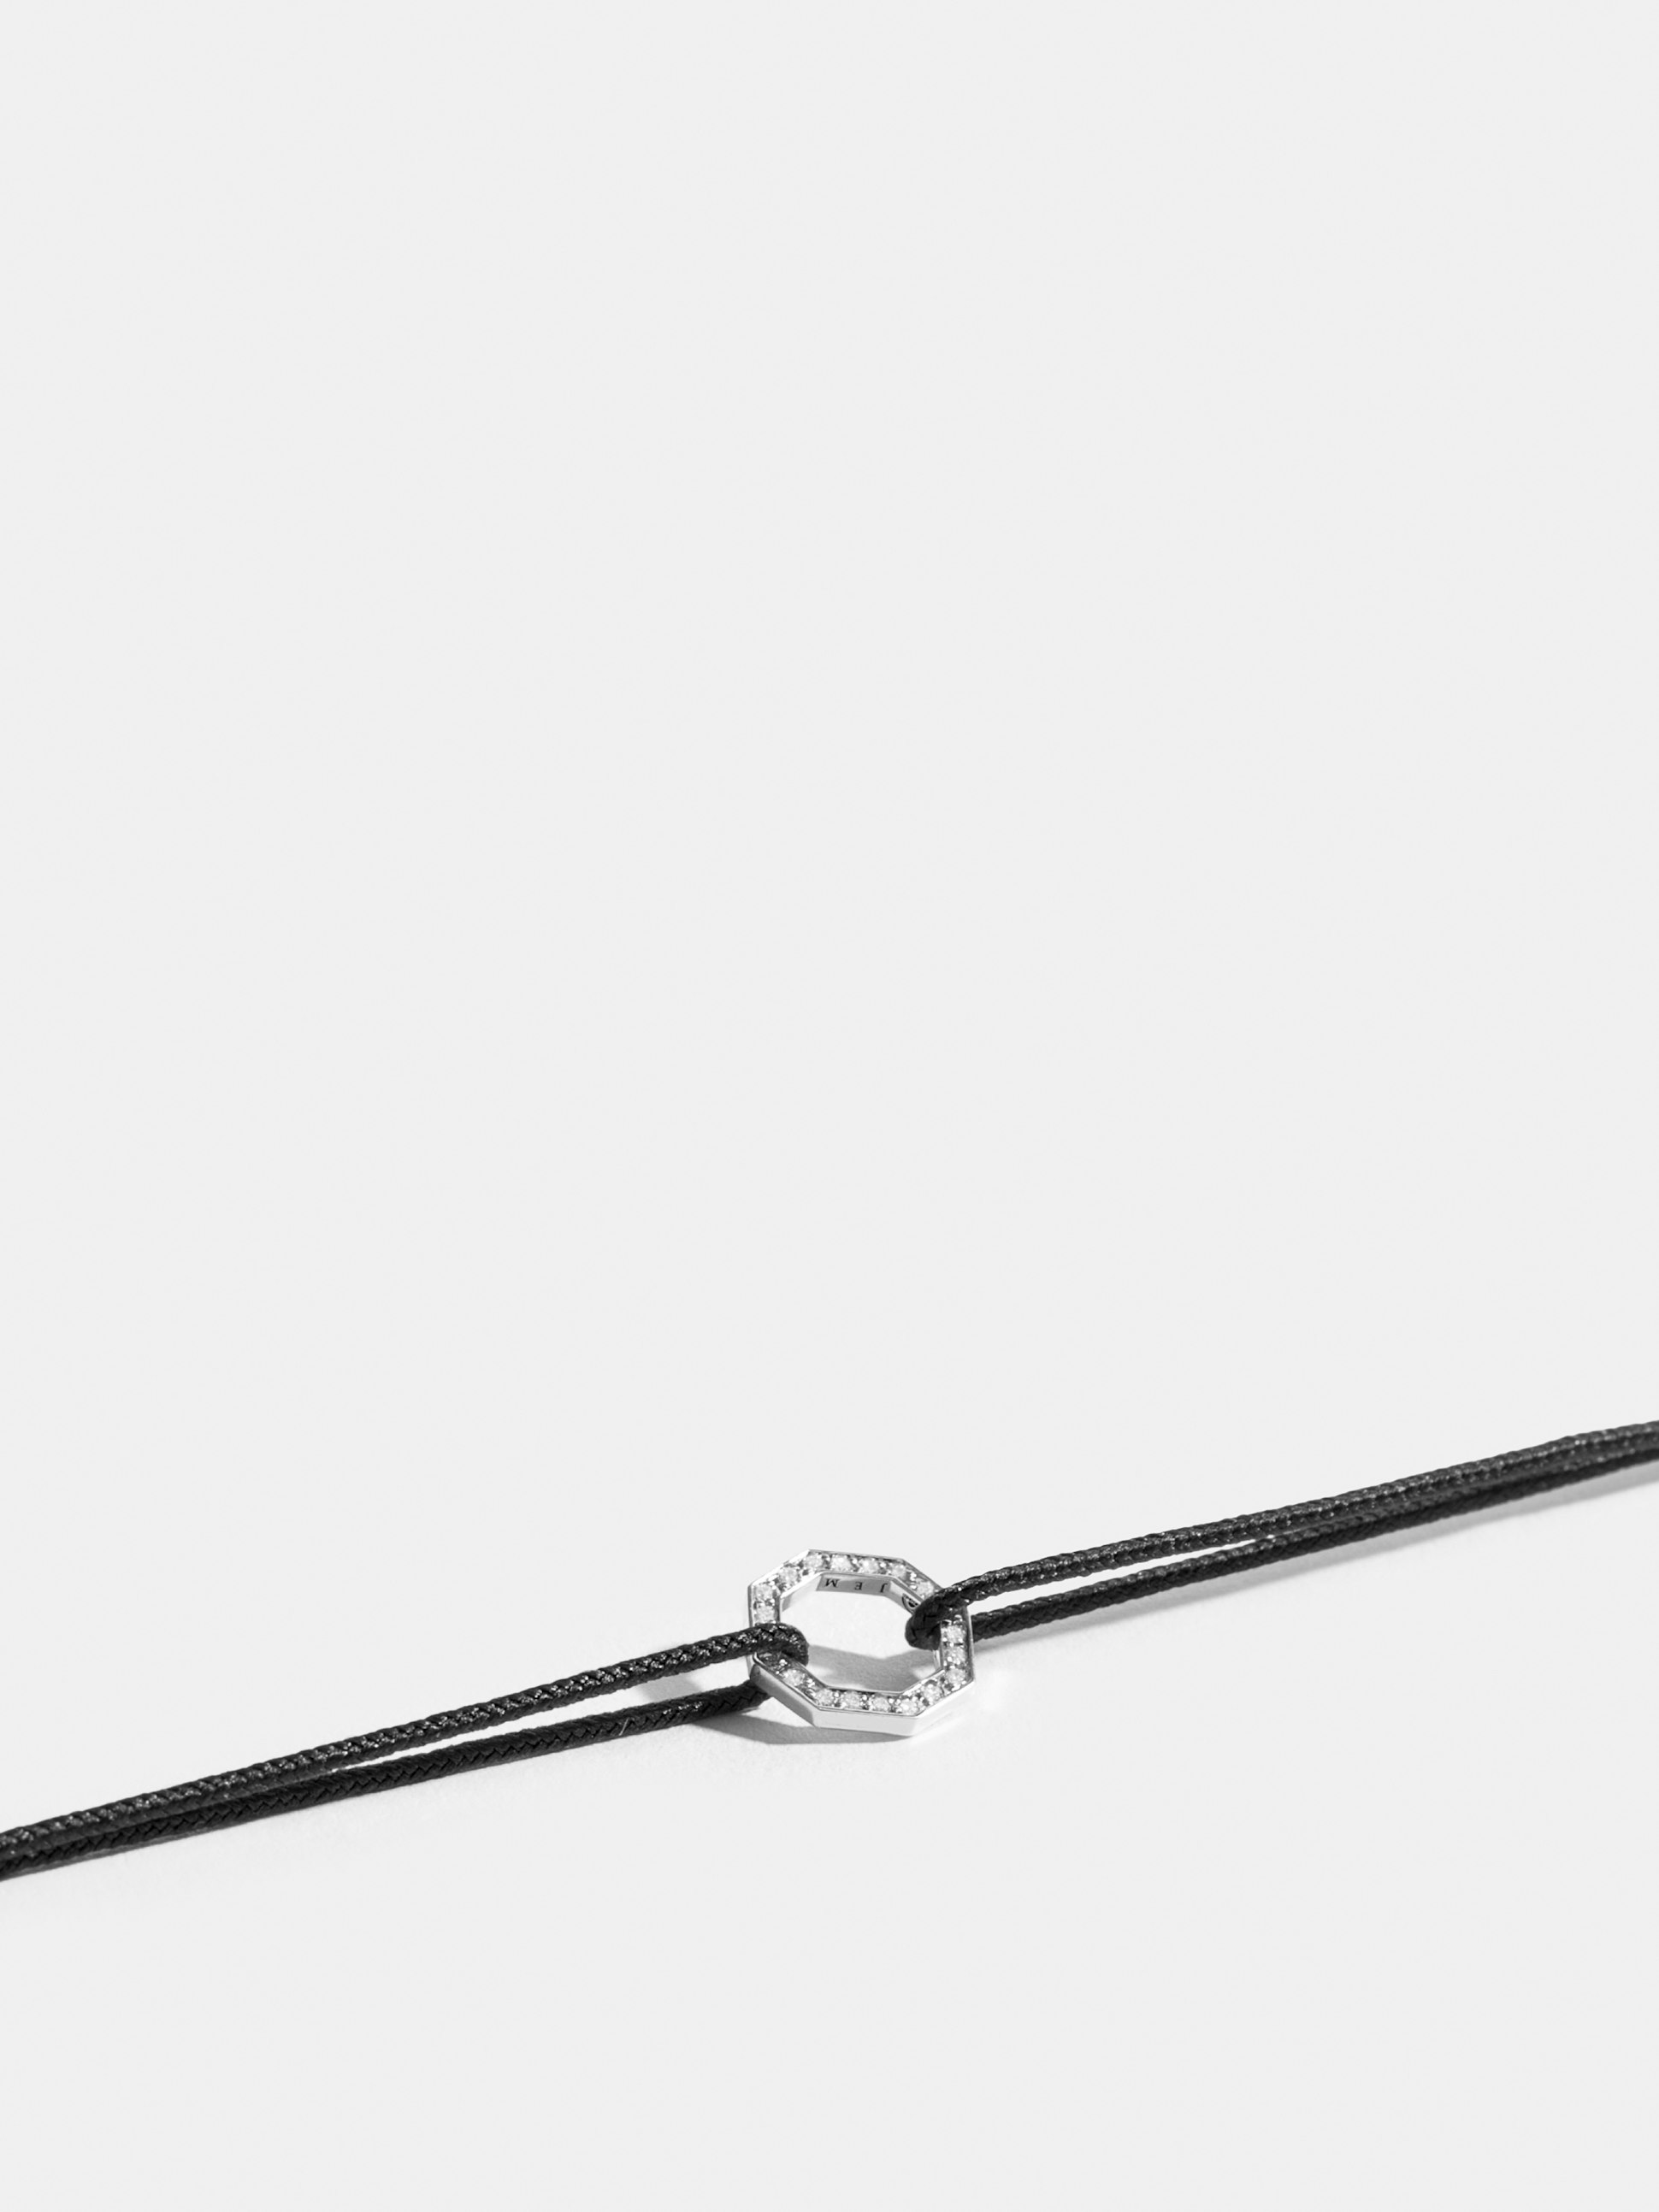 Octogone motif in 18k Fairmined ethical white gold, paved with lab-grown diamonds, on a cord.